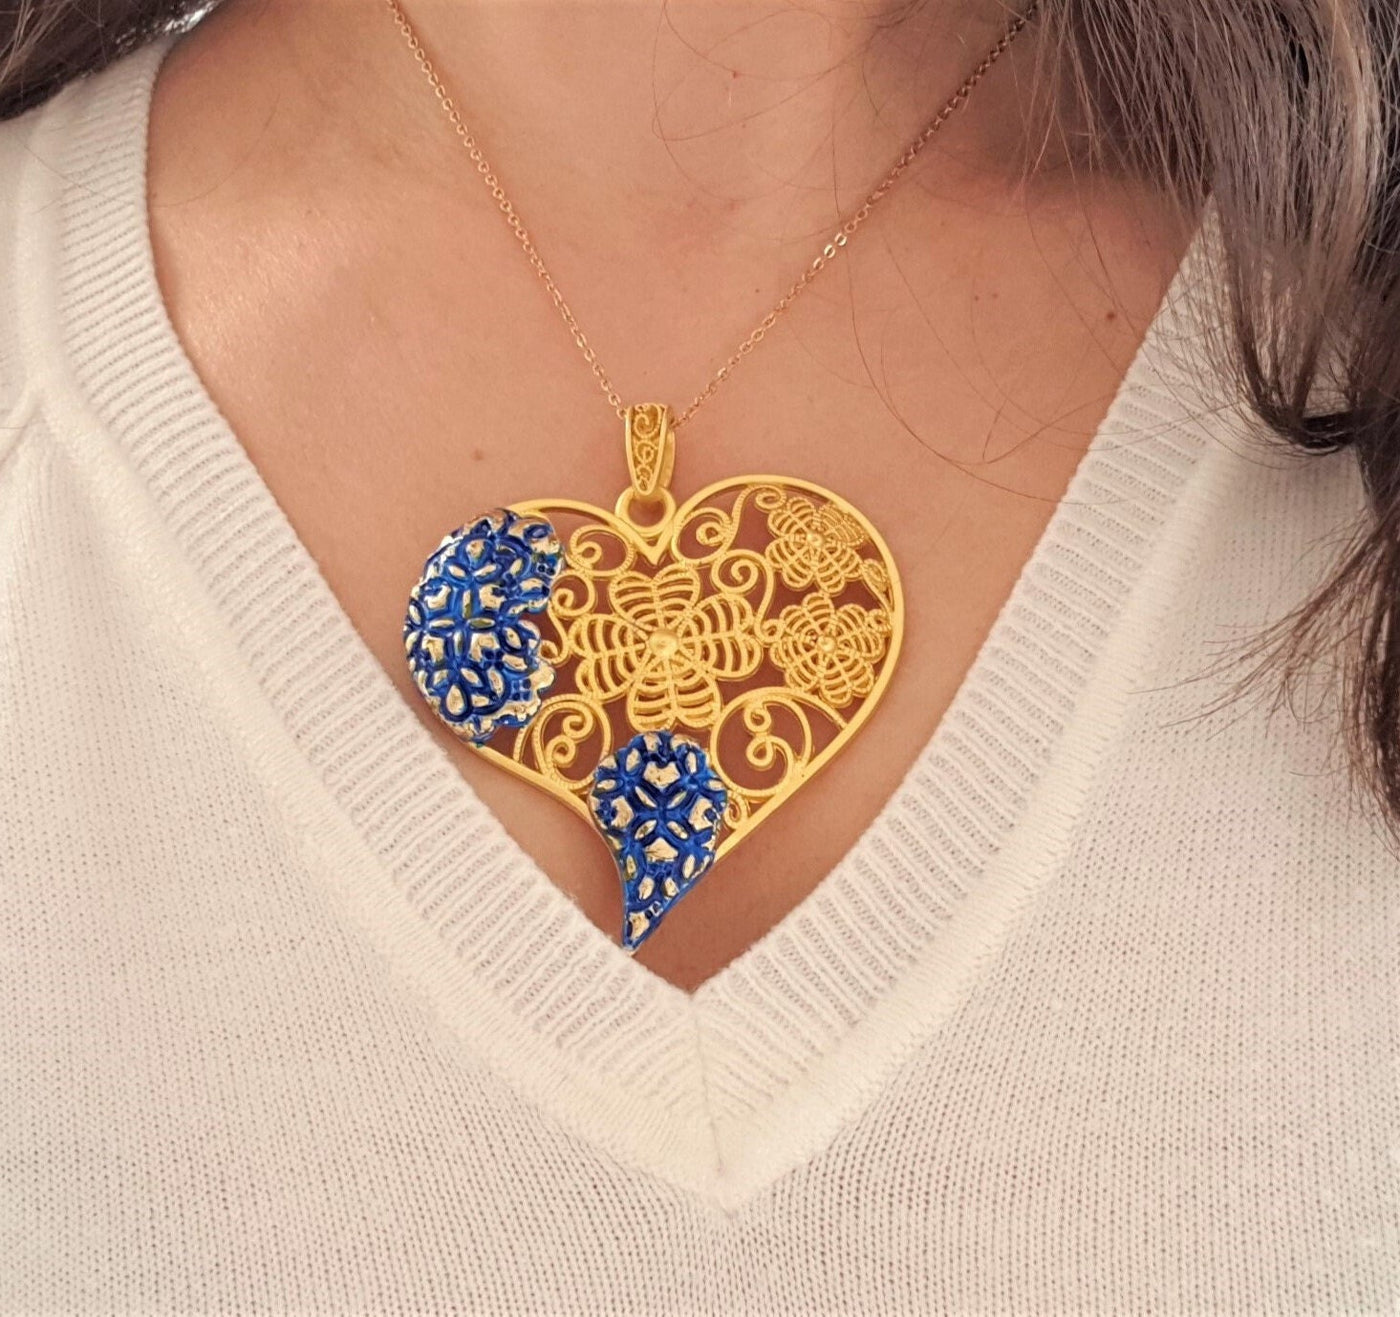 Filigree Heart Gold Statement Necklace Viana Heart Azulejo Pendant Portugal Clay Jewelry Flower Blue Enamel Gold Necklace Valentine's Gift